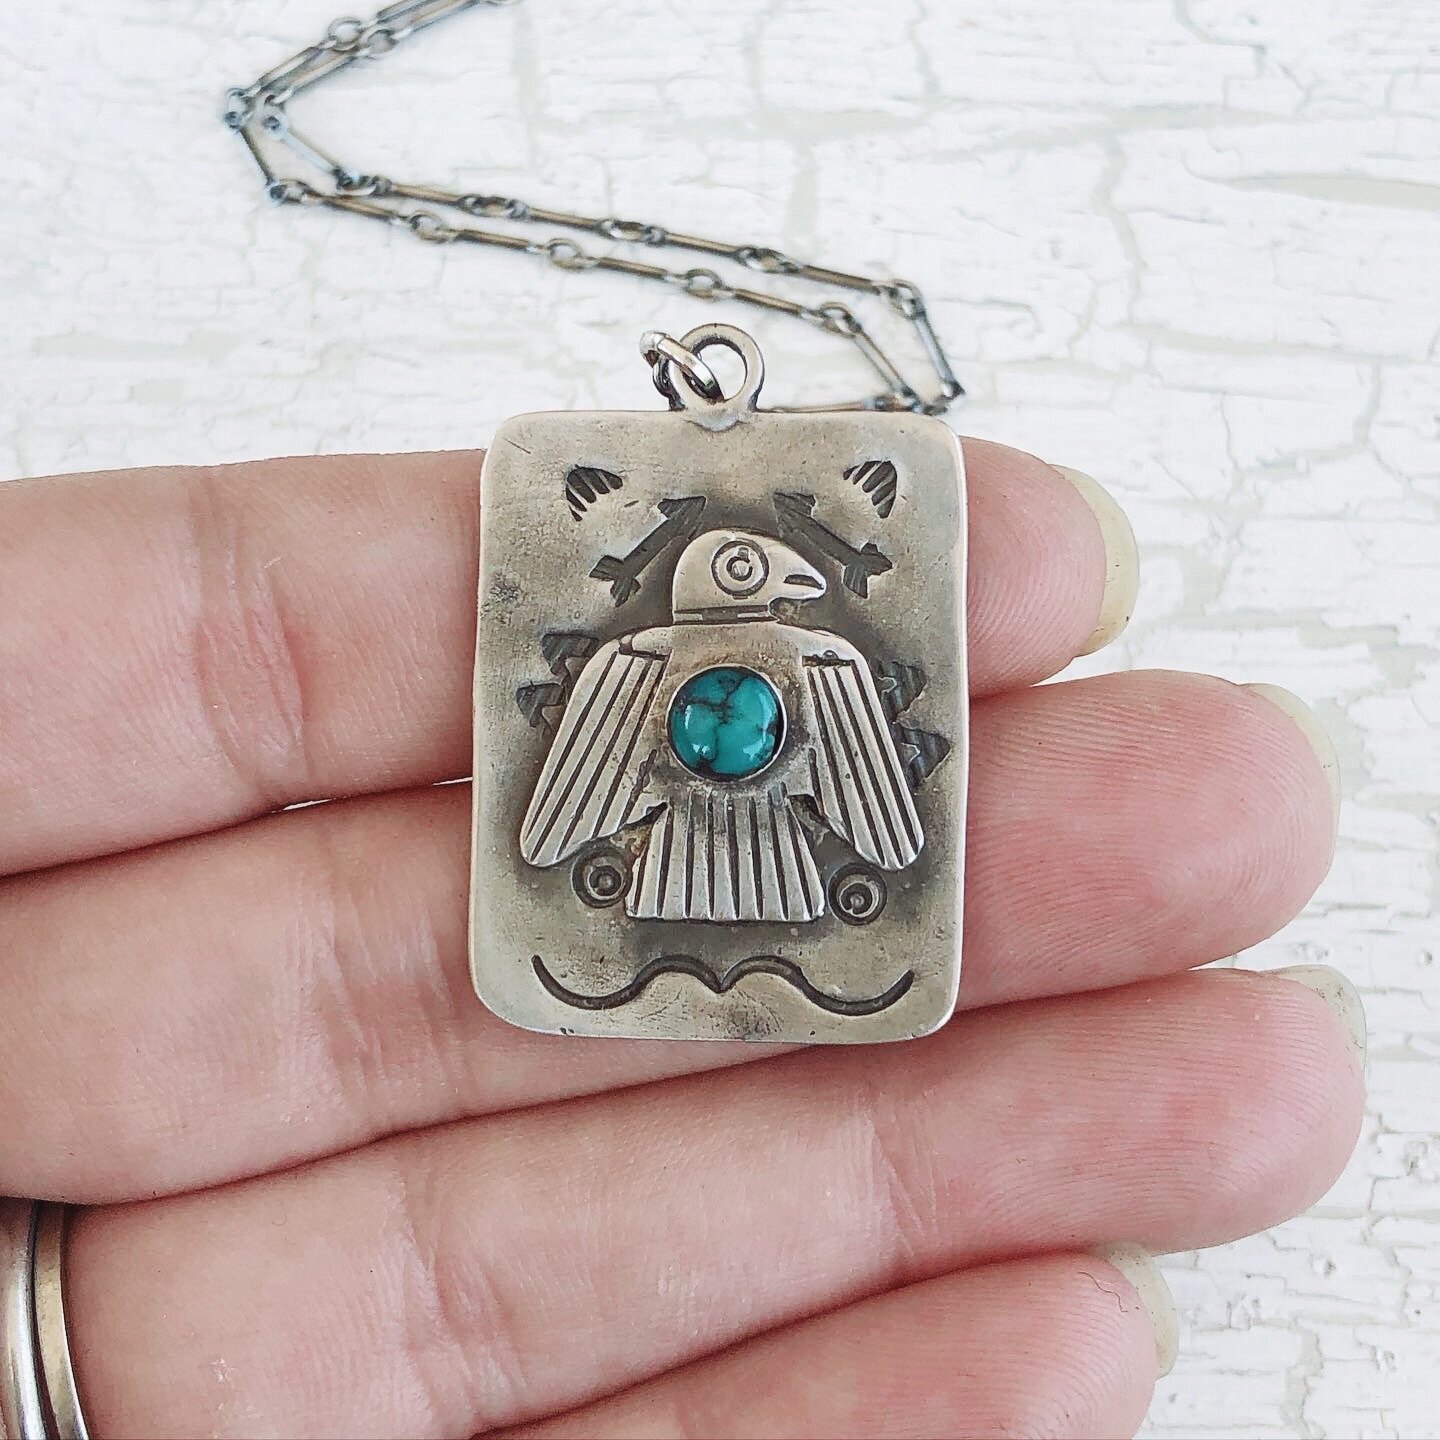 Knifewing Dancer Necklace 24in Turquoise VTG Nickel Silver Fred Harvey Era M 